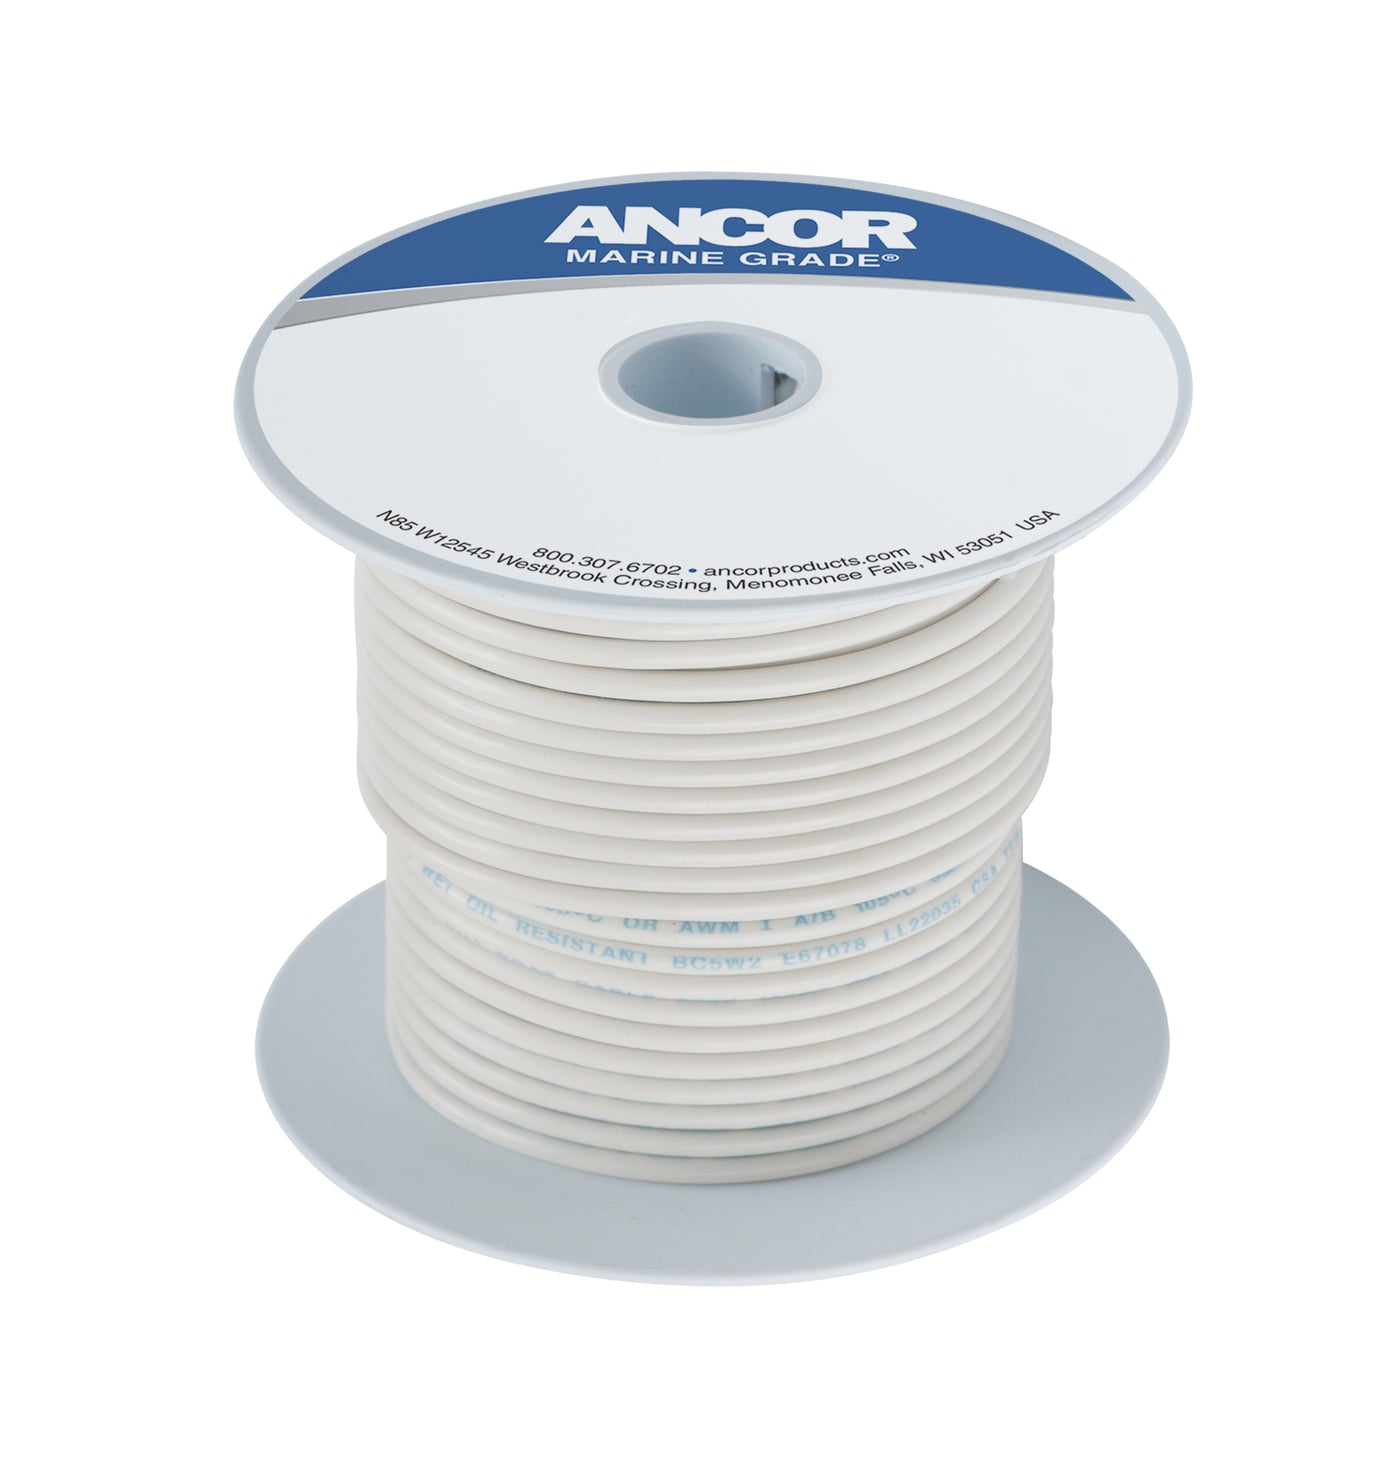 Ancor 111702 Tinned Copper Wire, 8 AWG (8mm²), White - 25ft